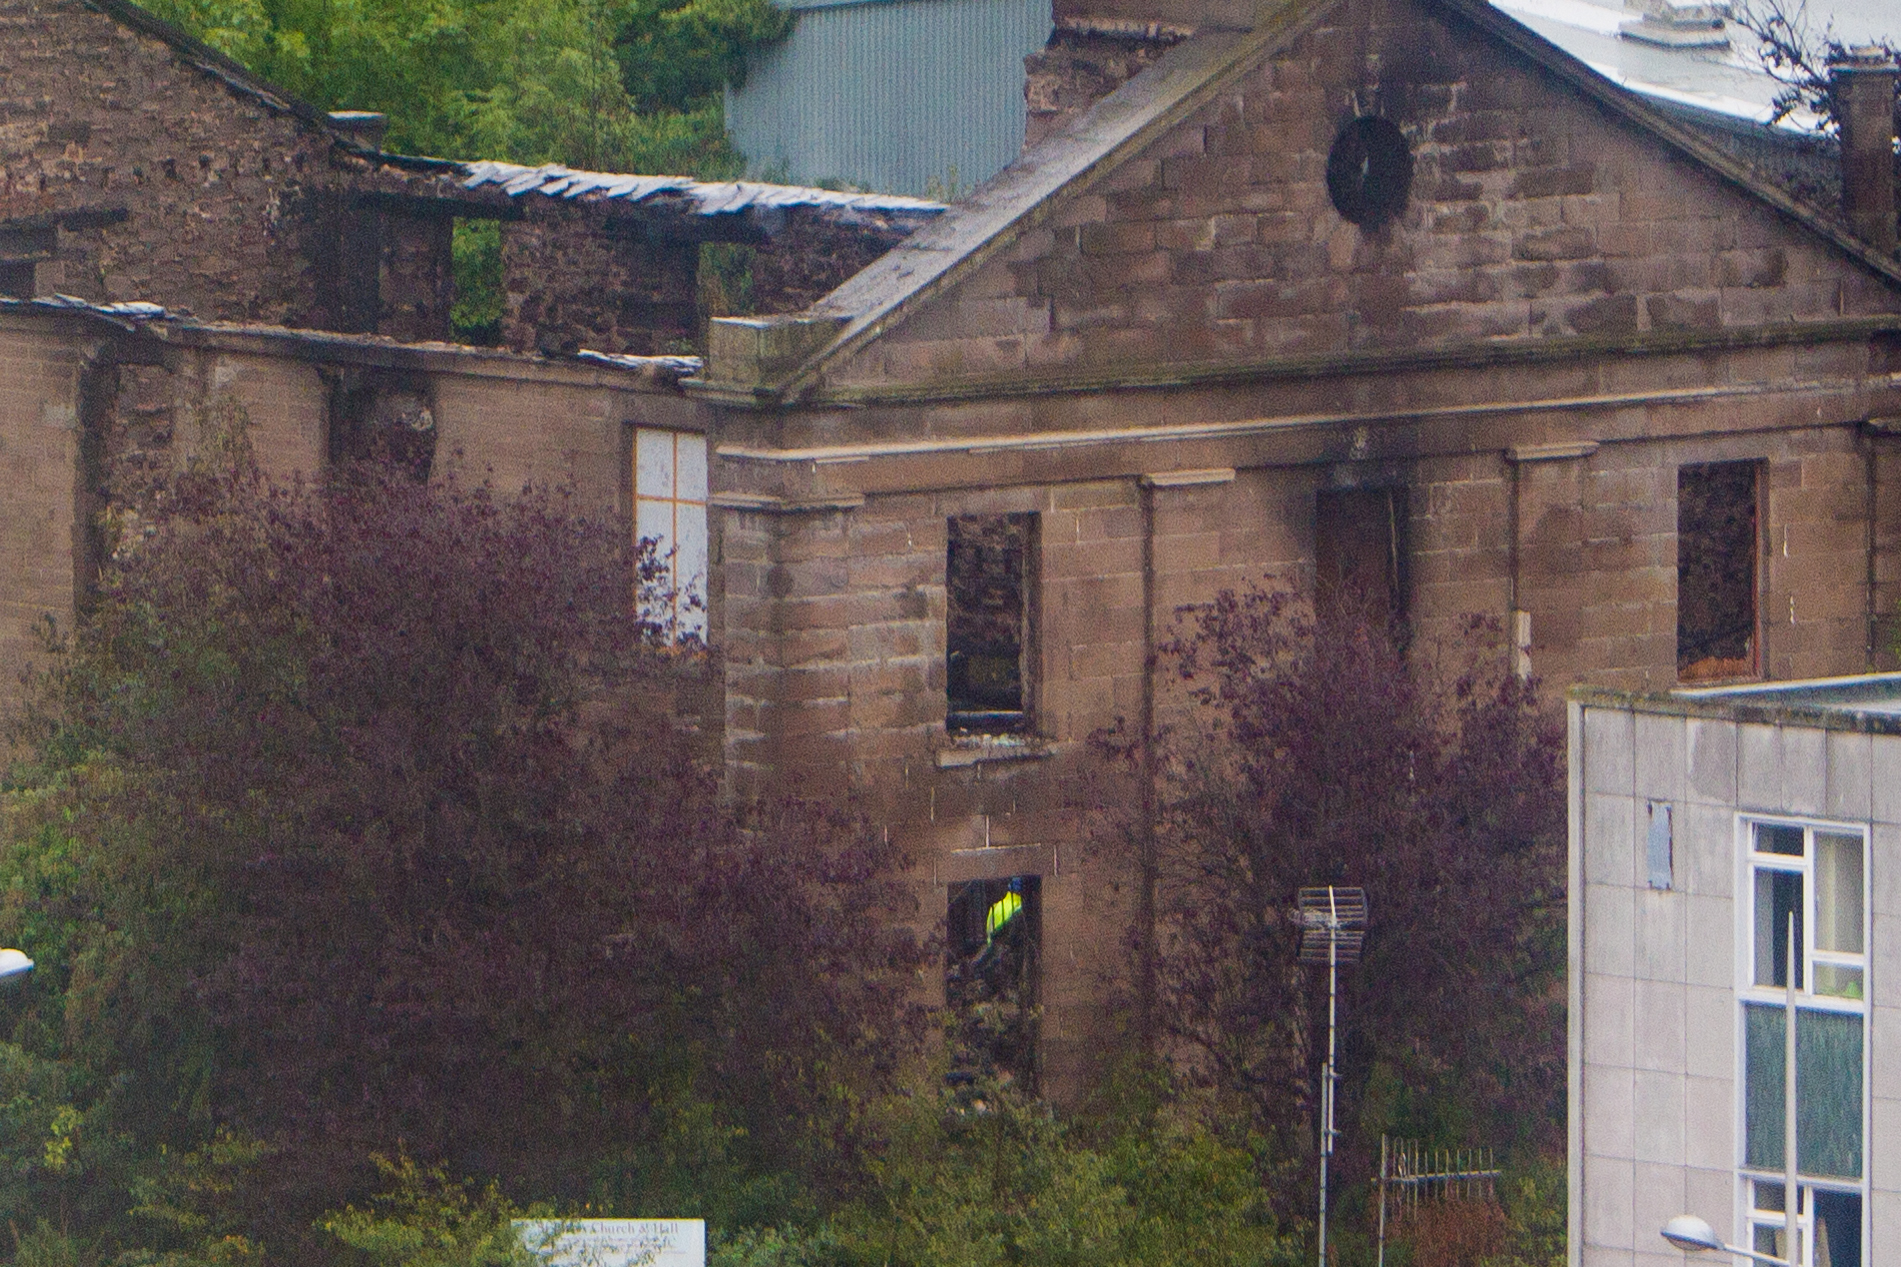 The fire-ravaged church is set to be partly demolished.